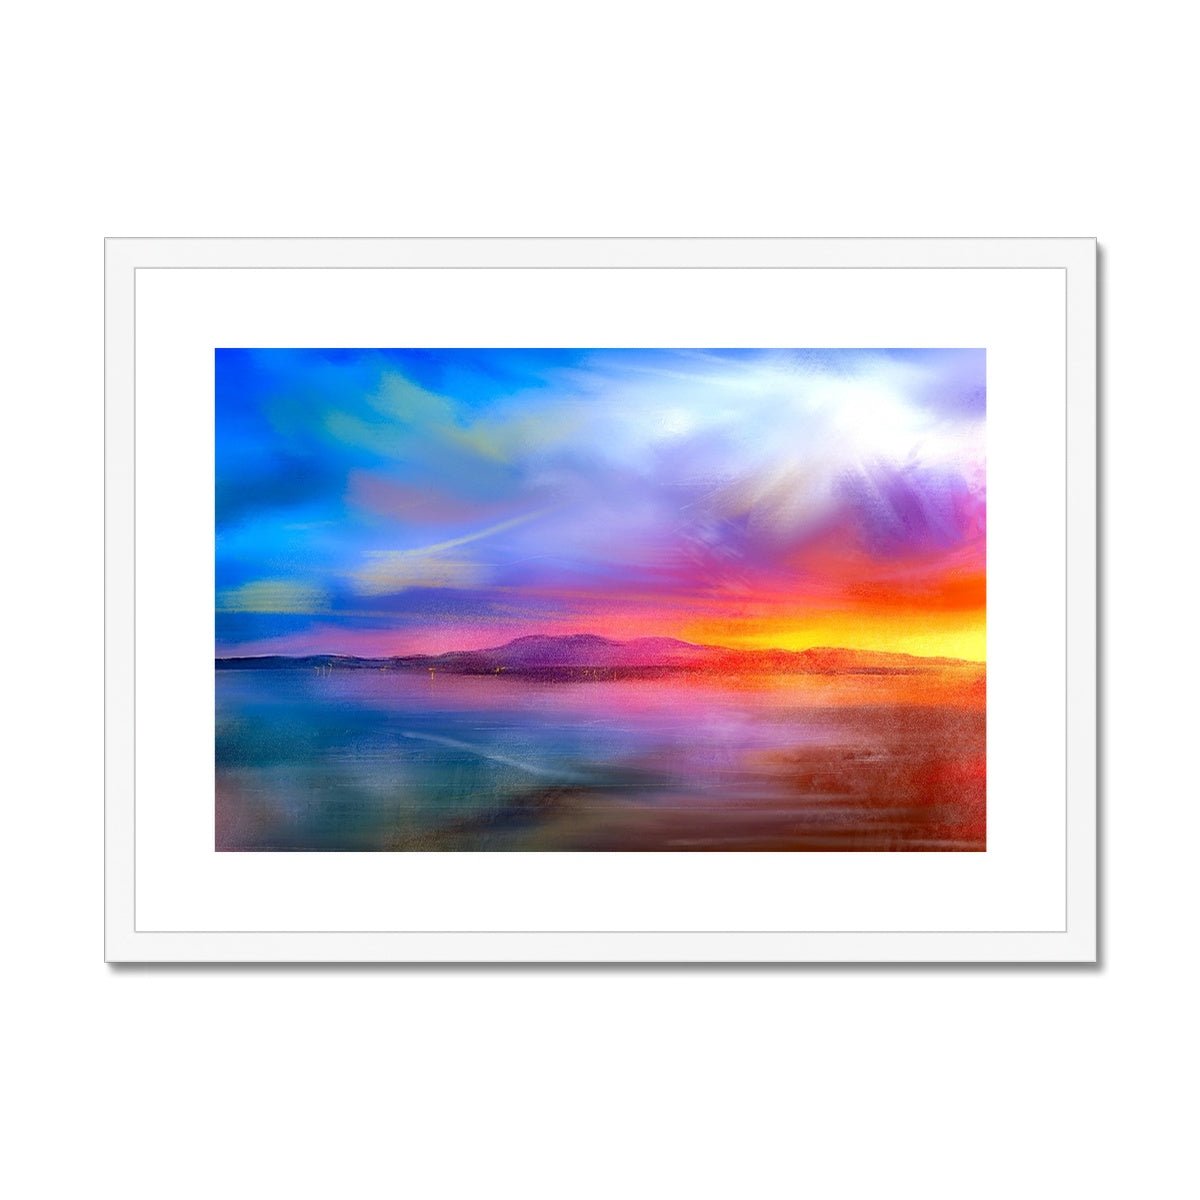 Arran Sunset Painting | Framed & Mounted Prints From Scotland-Framed & Mounted Prints-Arran Art Gallery-A2 Landscape-White Frame-Paintings, Prints, Homeware, Art Gifts From Scotland By Scottish Artist Kevin Hunter